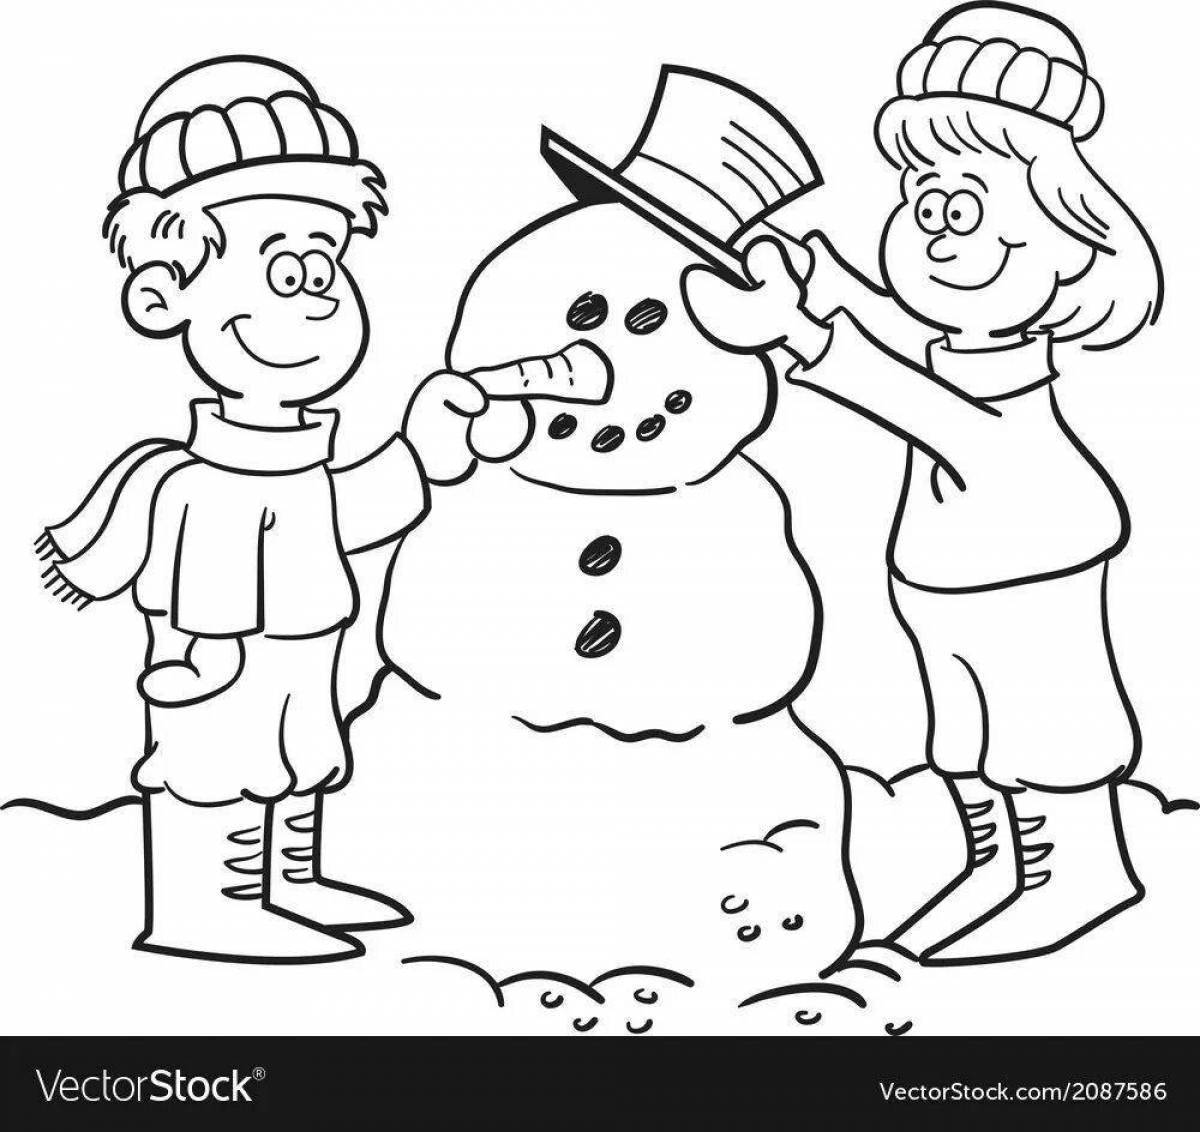 Adorable snowman coloring book for kids